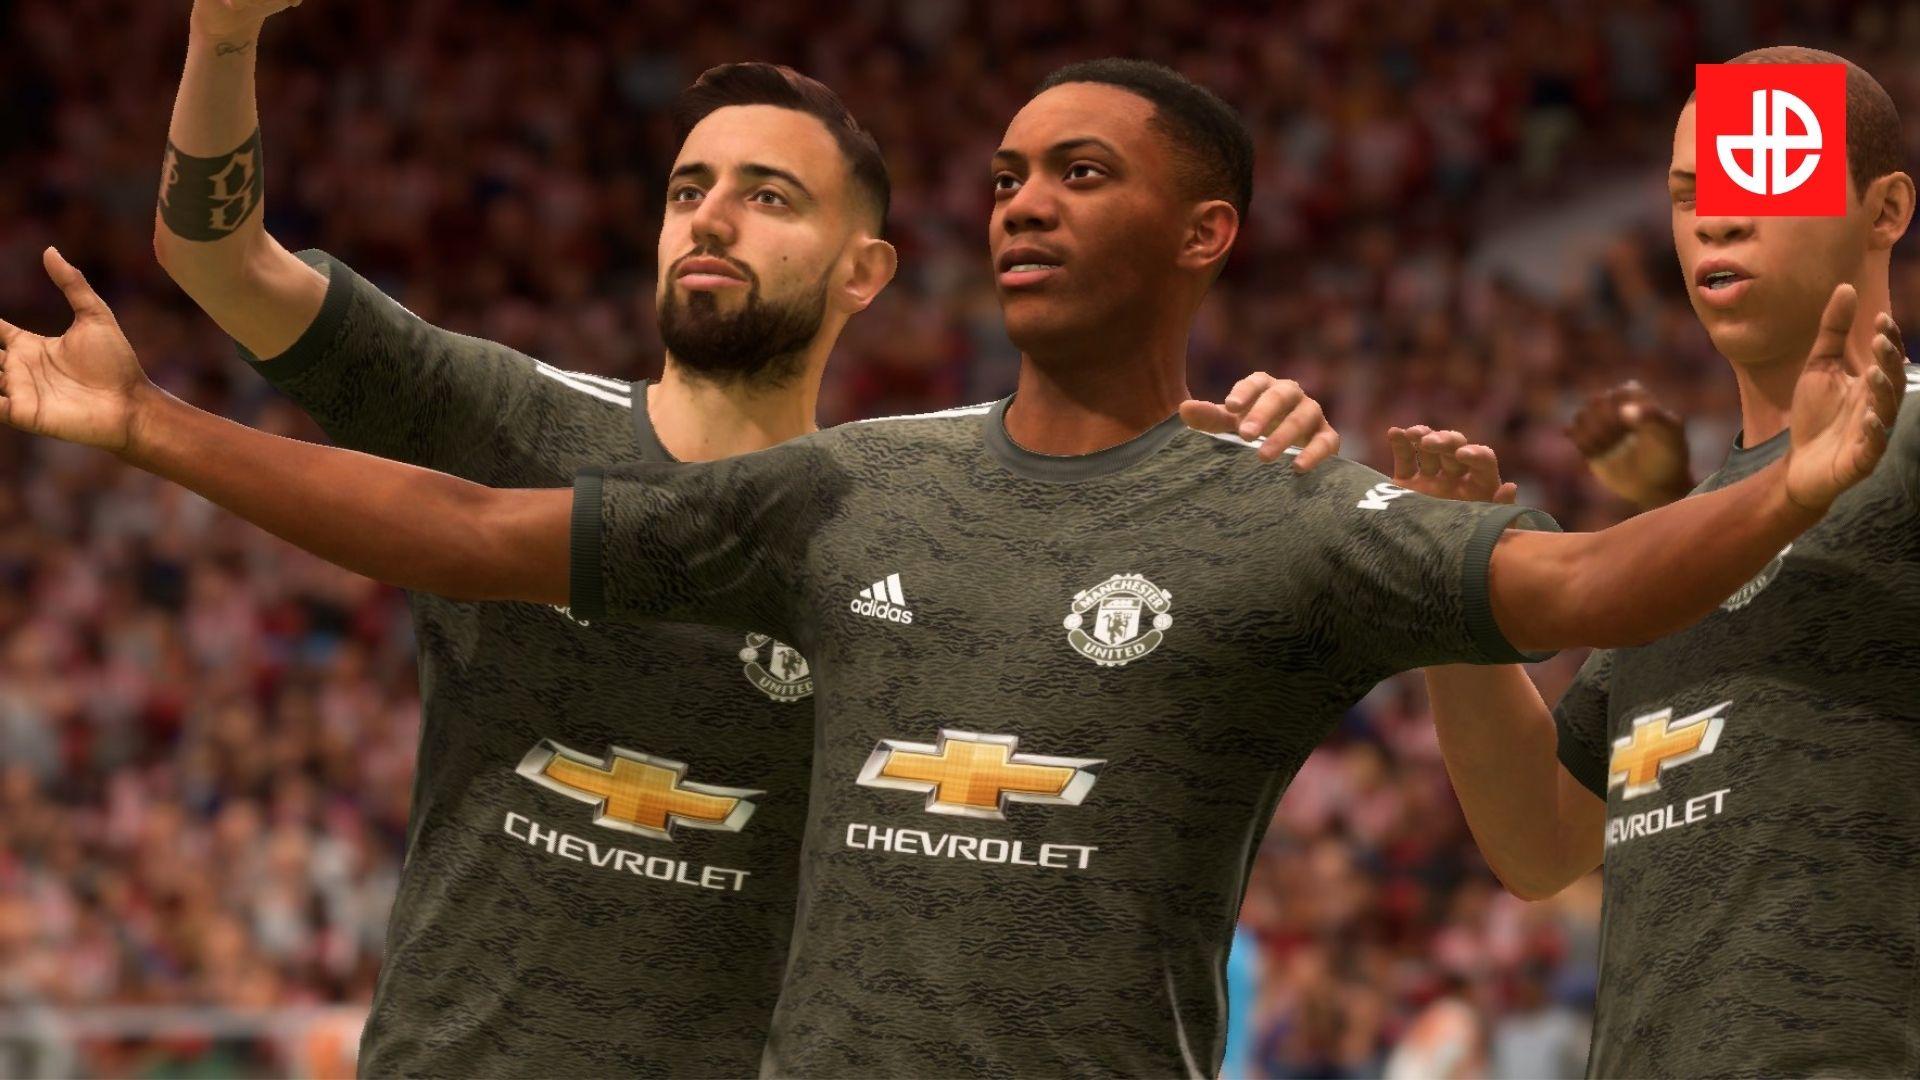 FIFA 21 best strikers image with Martial from Man Utd